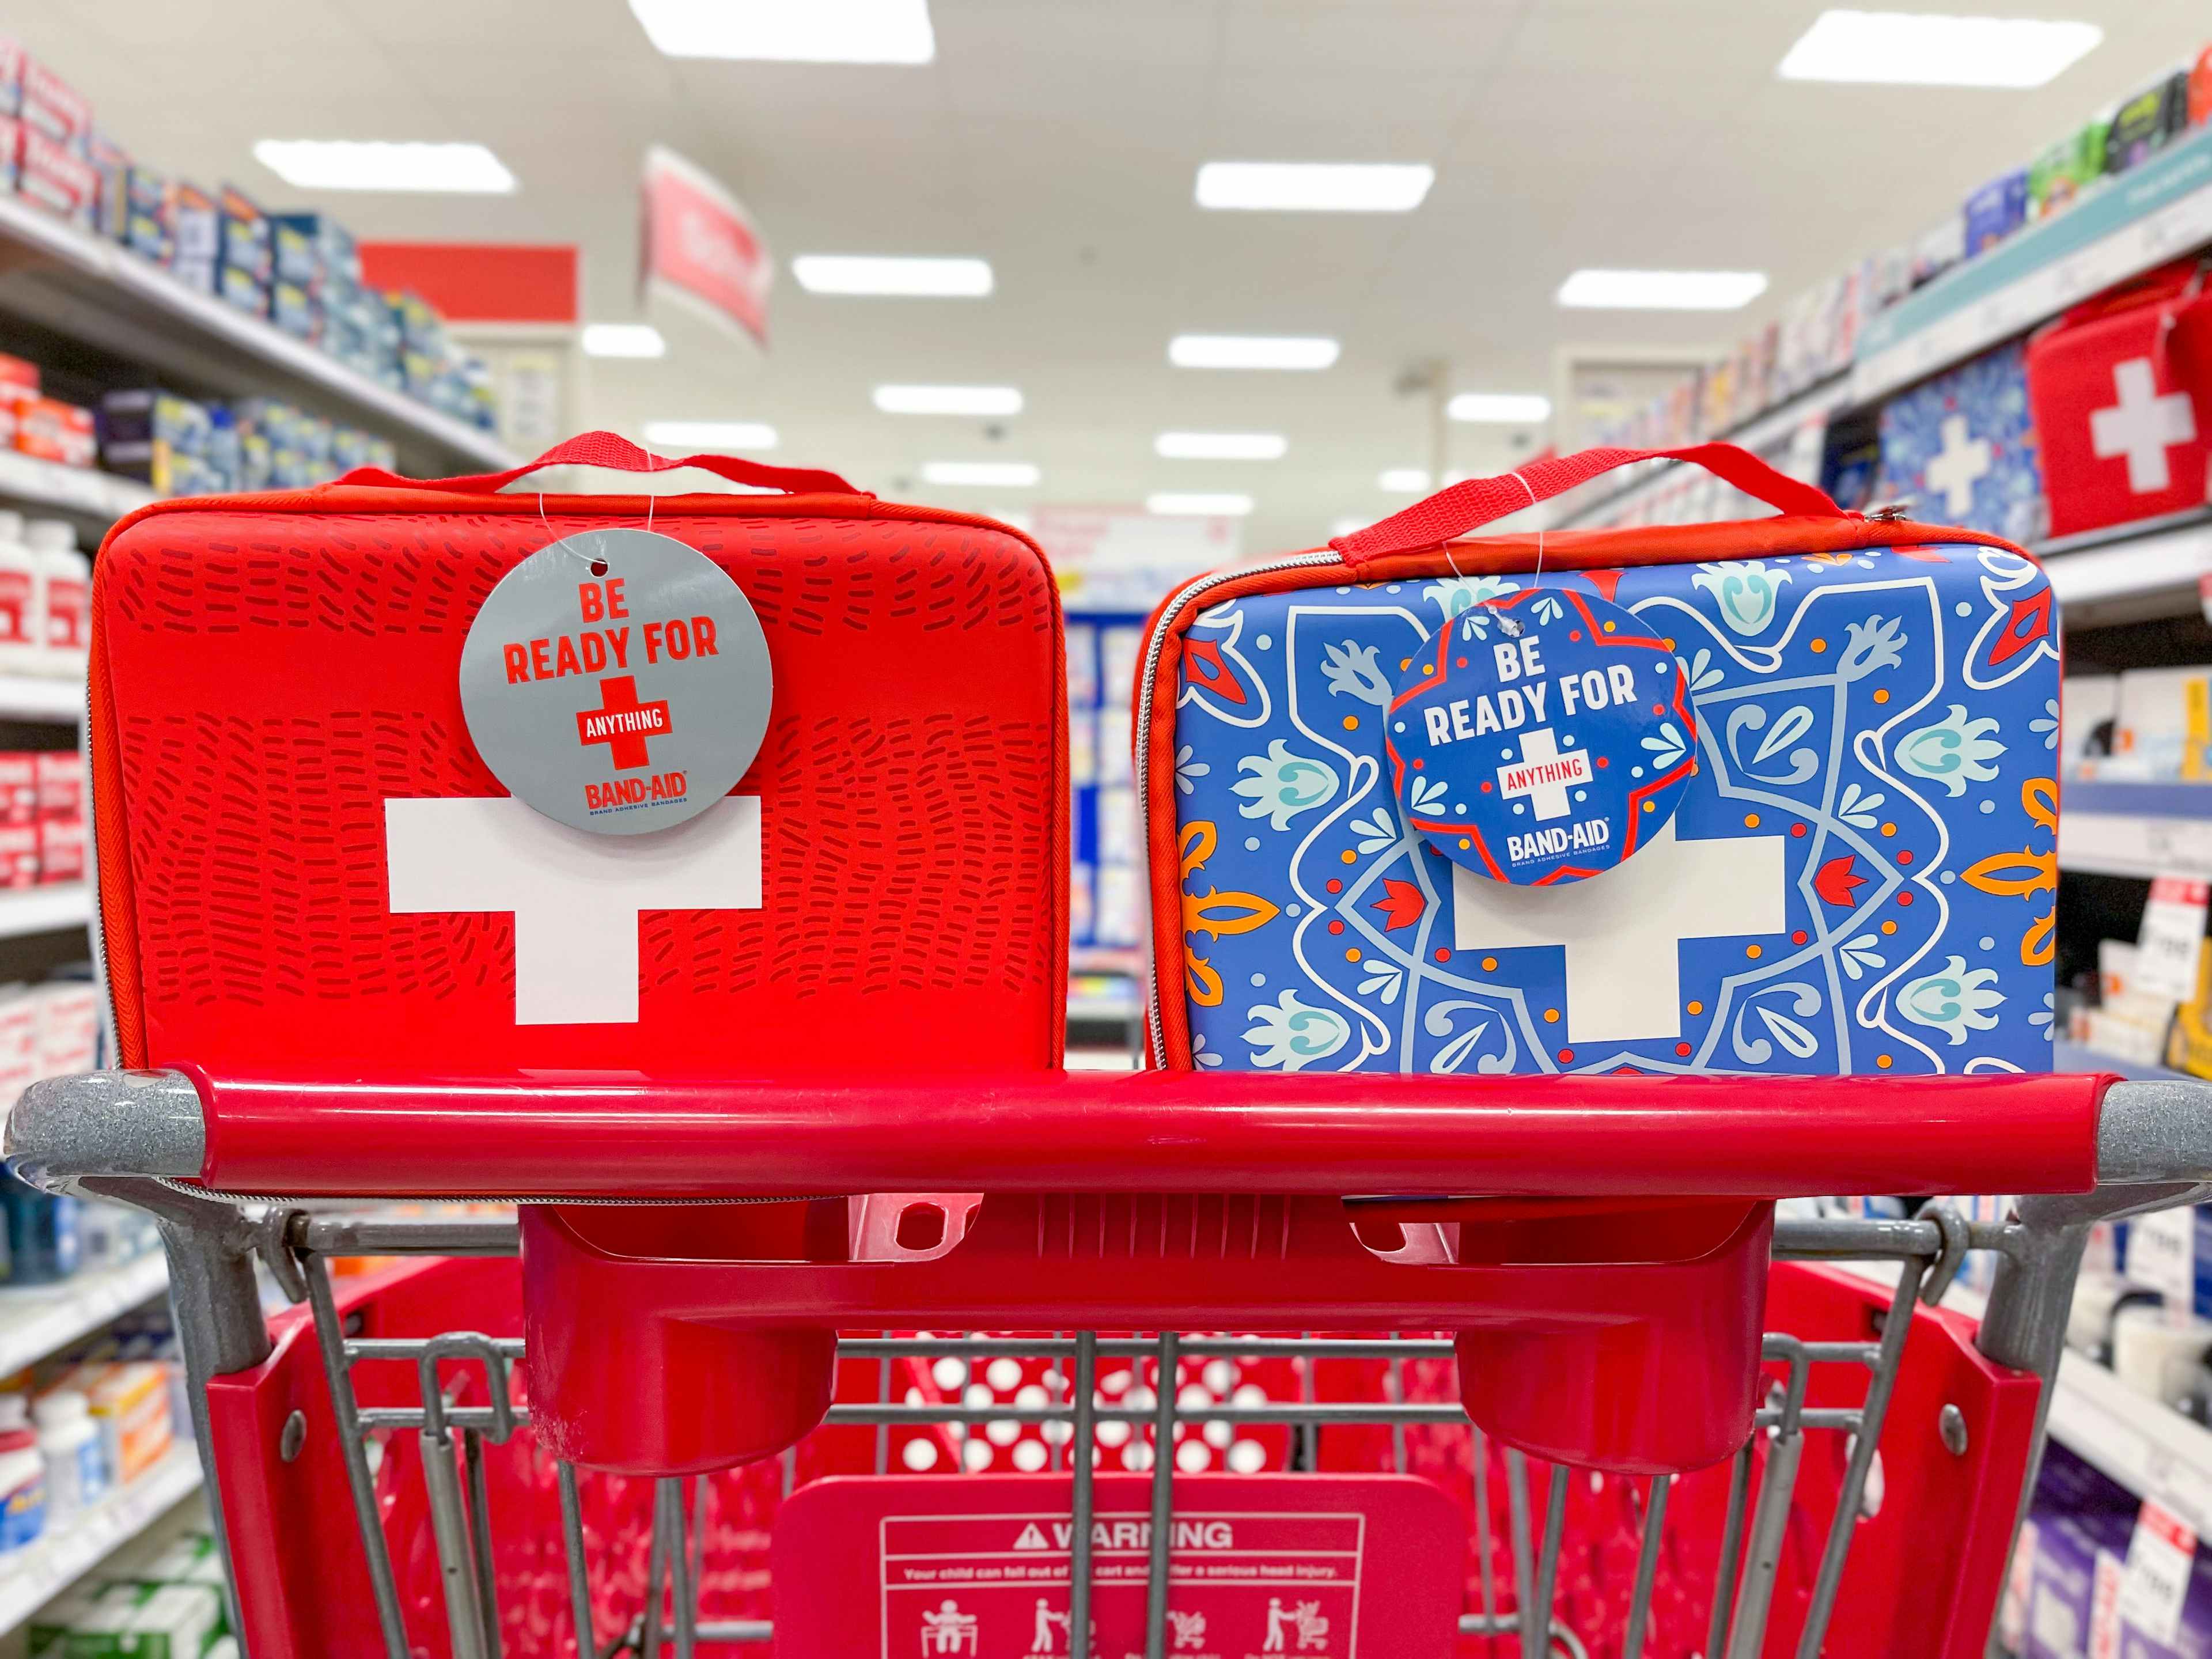 Red and blue first aid kits in a red target cart